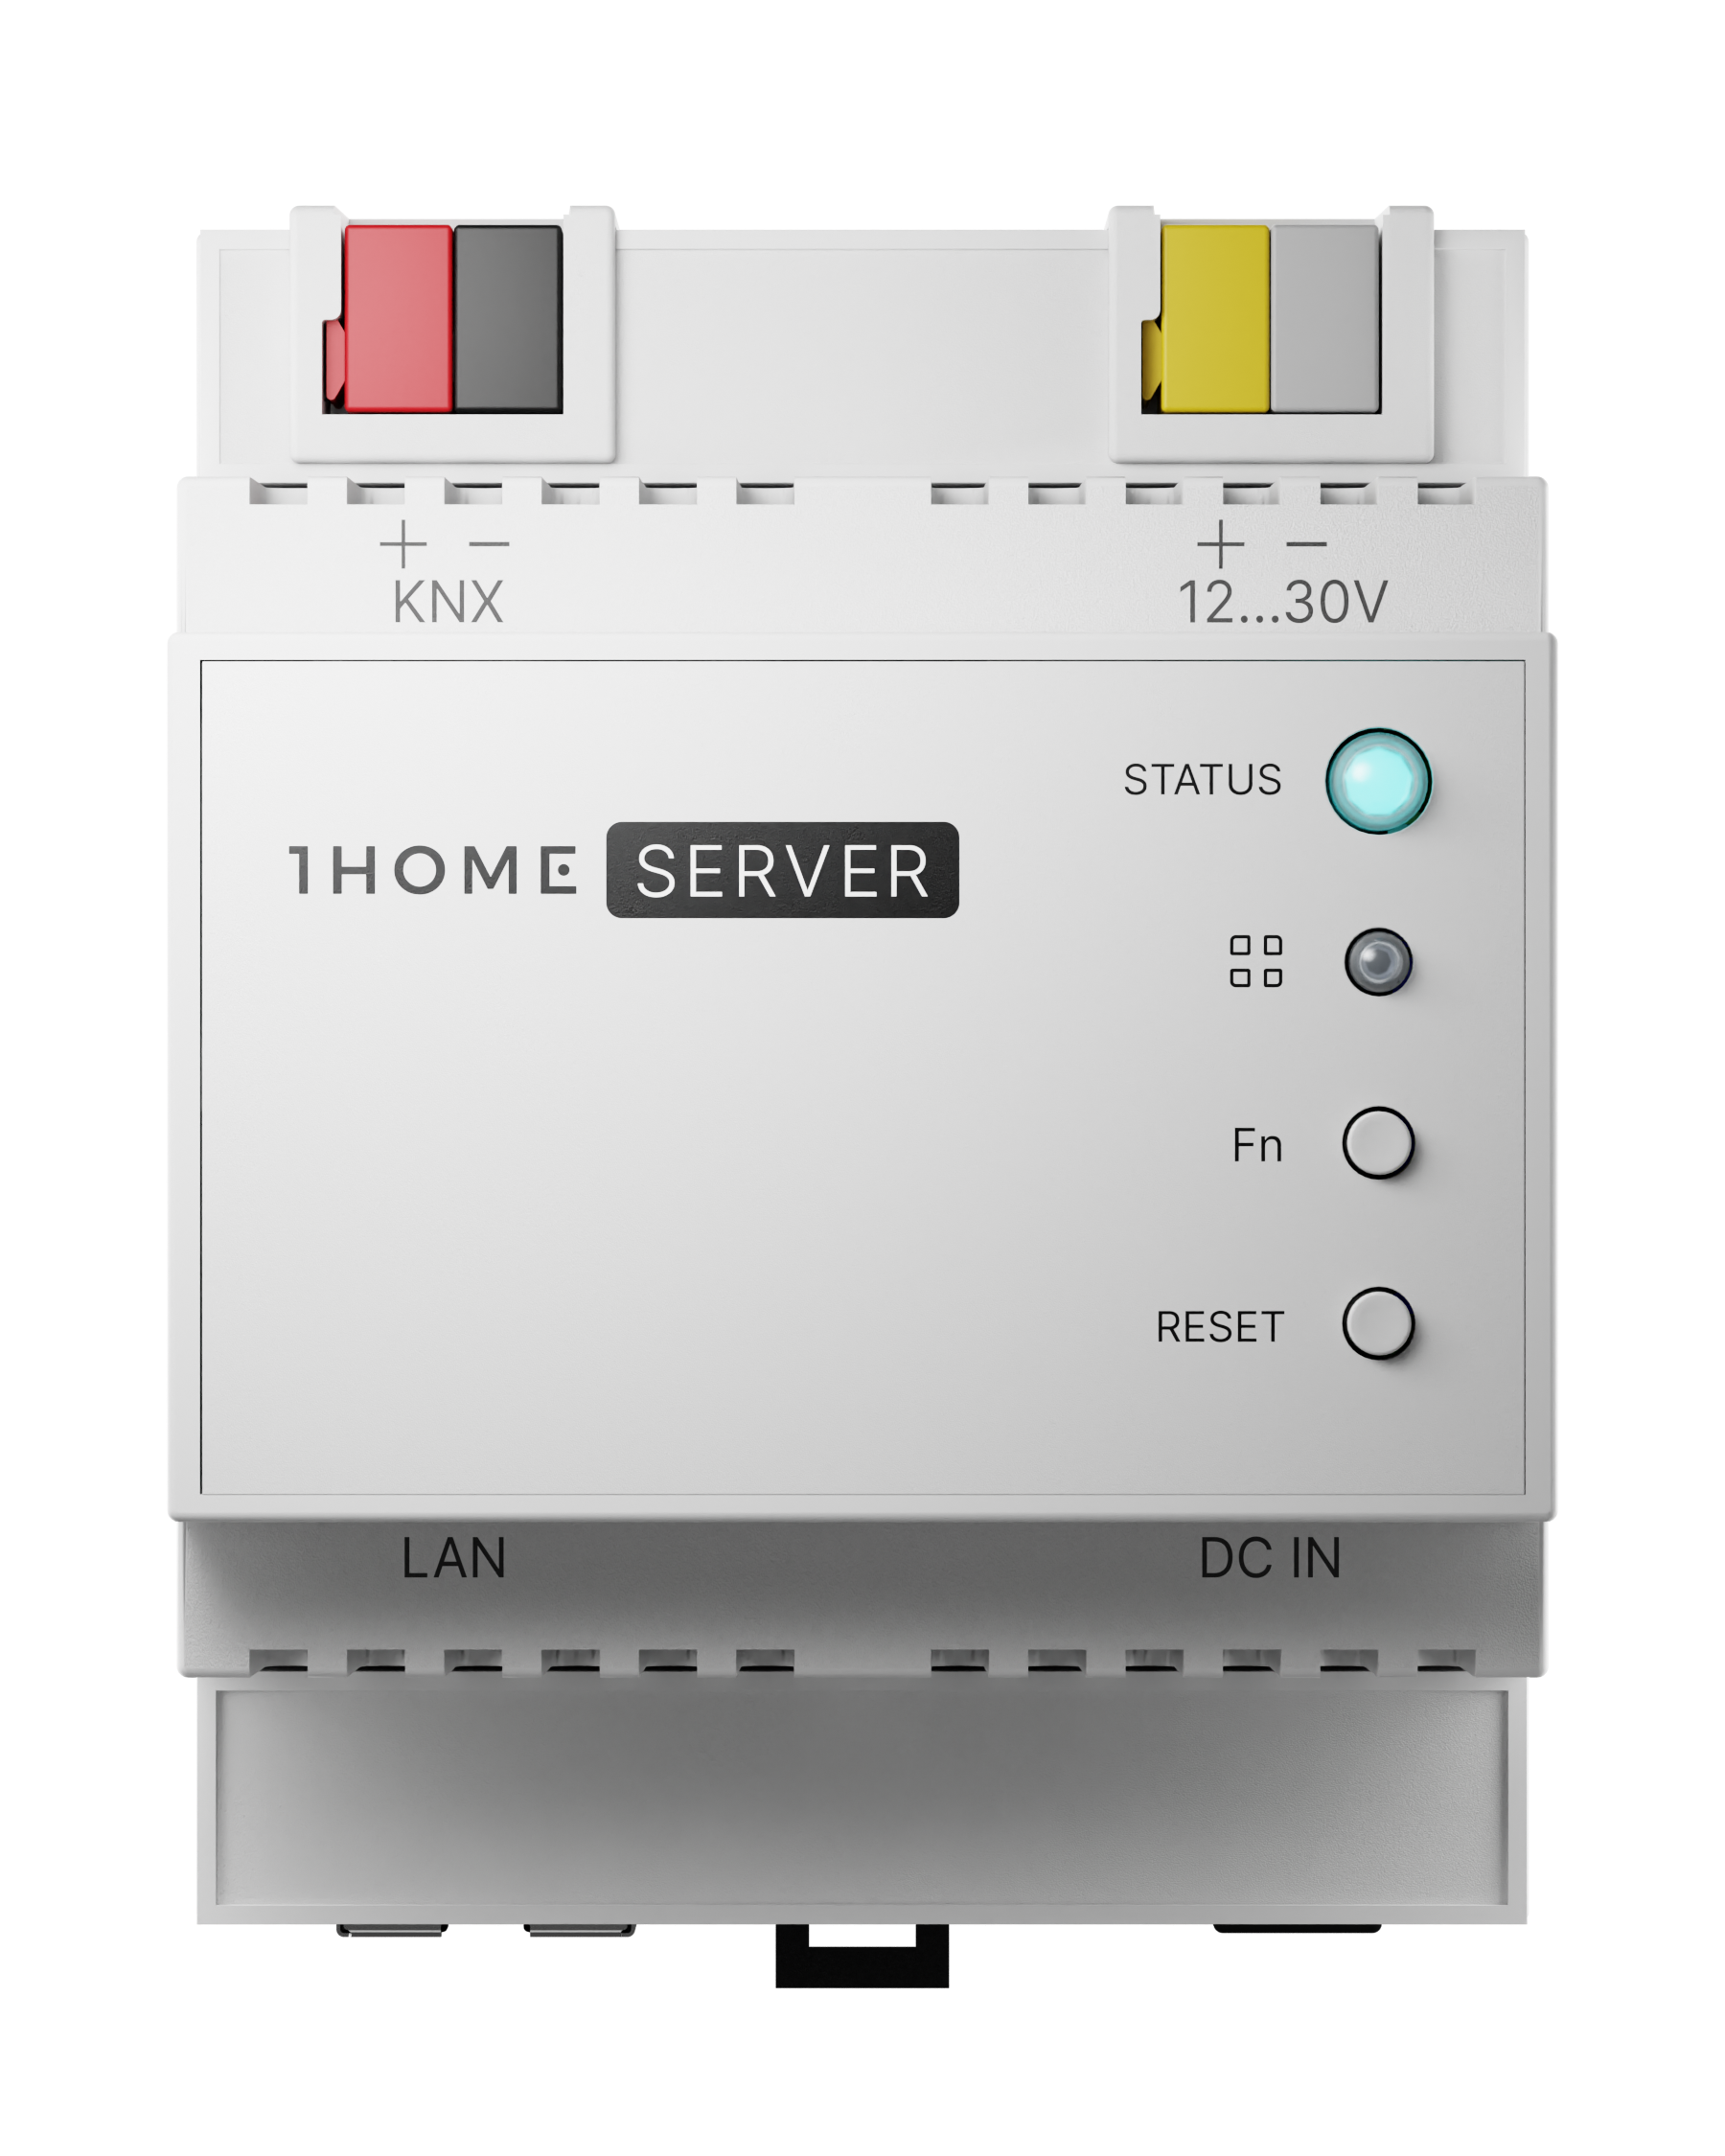 1Home Server for KNX/Loxone. Full integration with Apple Home, Google Home, Samsung SmartThings, voice interfaces and Matter